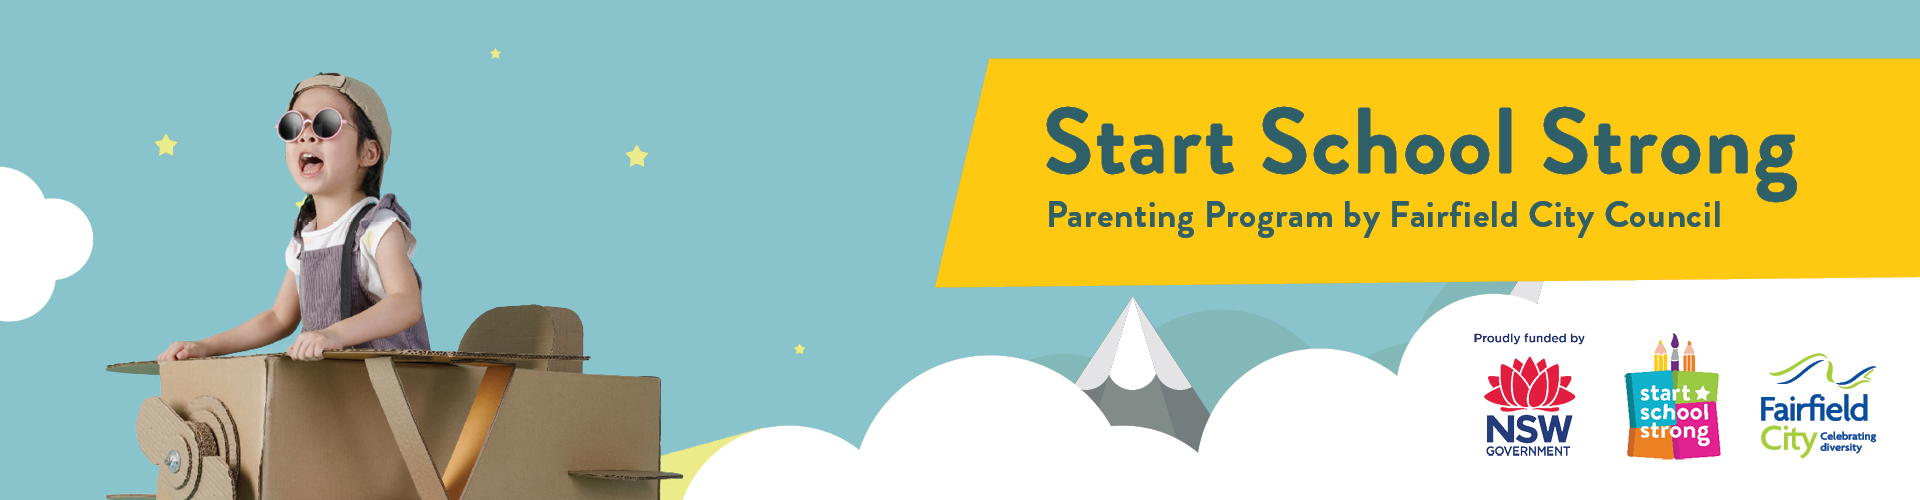 Start School Strong Parenting Program by Fairfield City Council featuring a young girl in a cardboard airplane flying amongst cartoon clouds and mountains